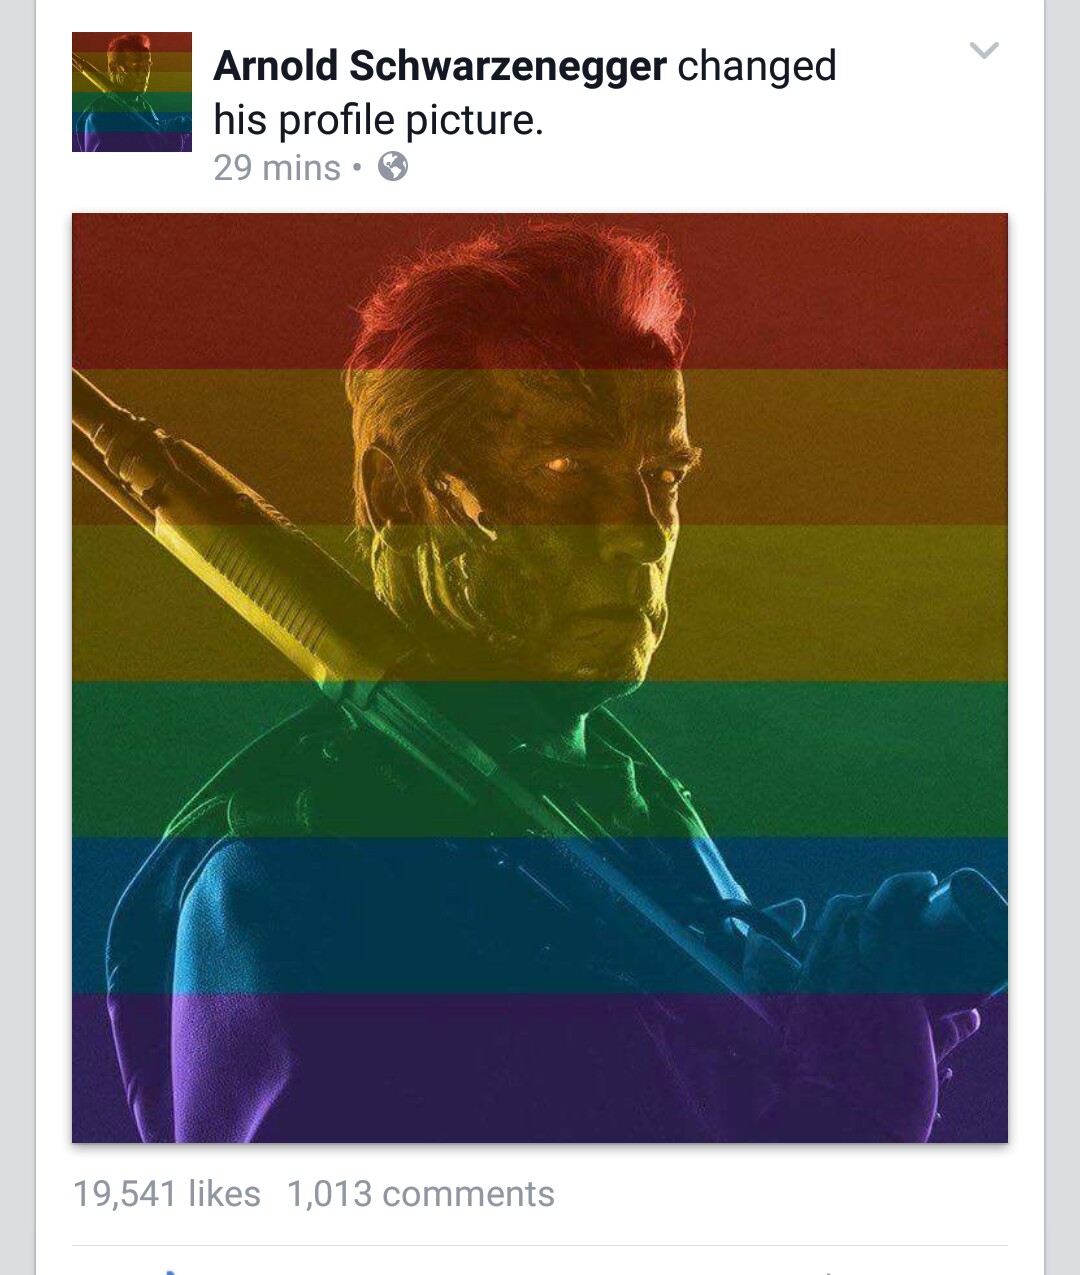 arnold schwarzenegger gay - Arnold Schwarzenegger changed his profile picture. 29 mins 19,541 1,013